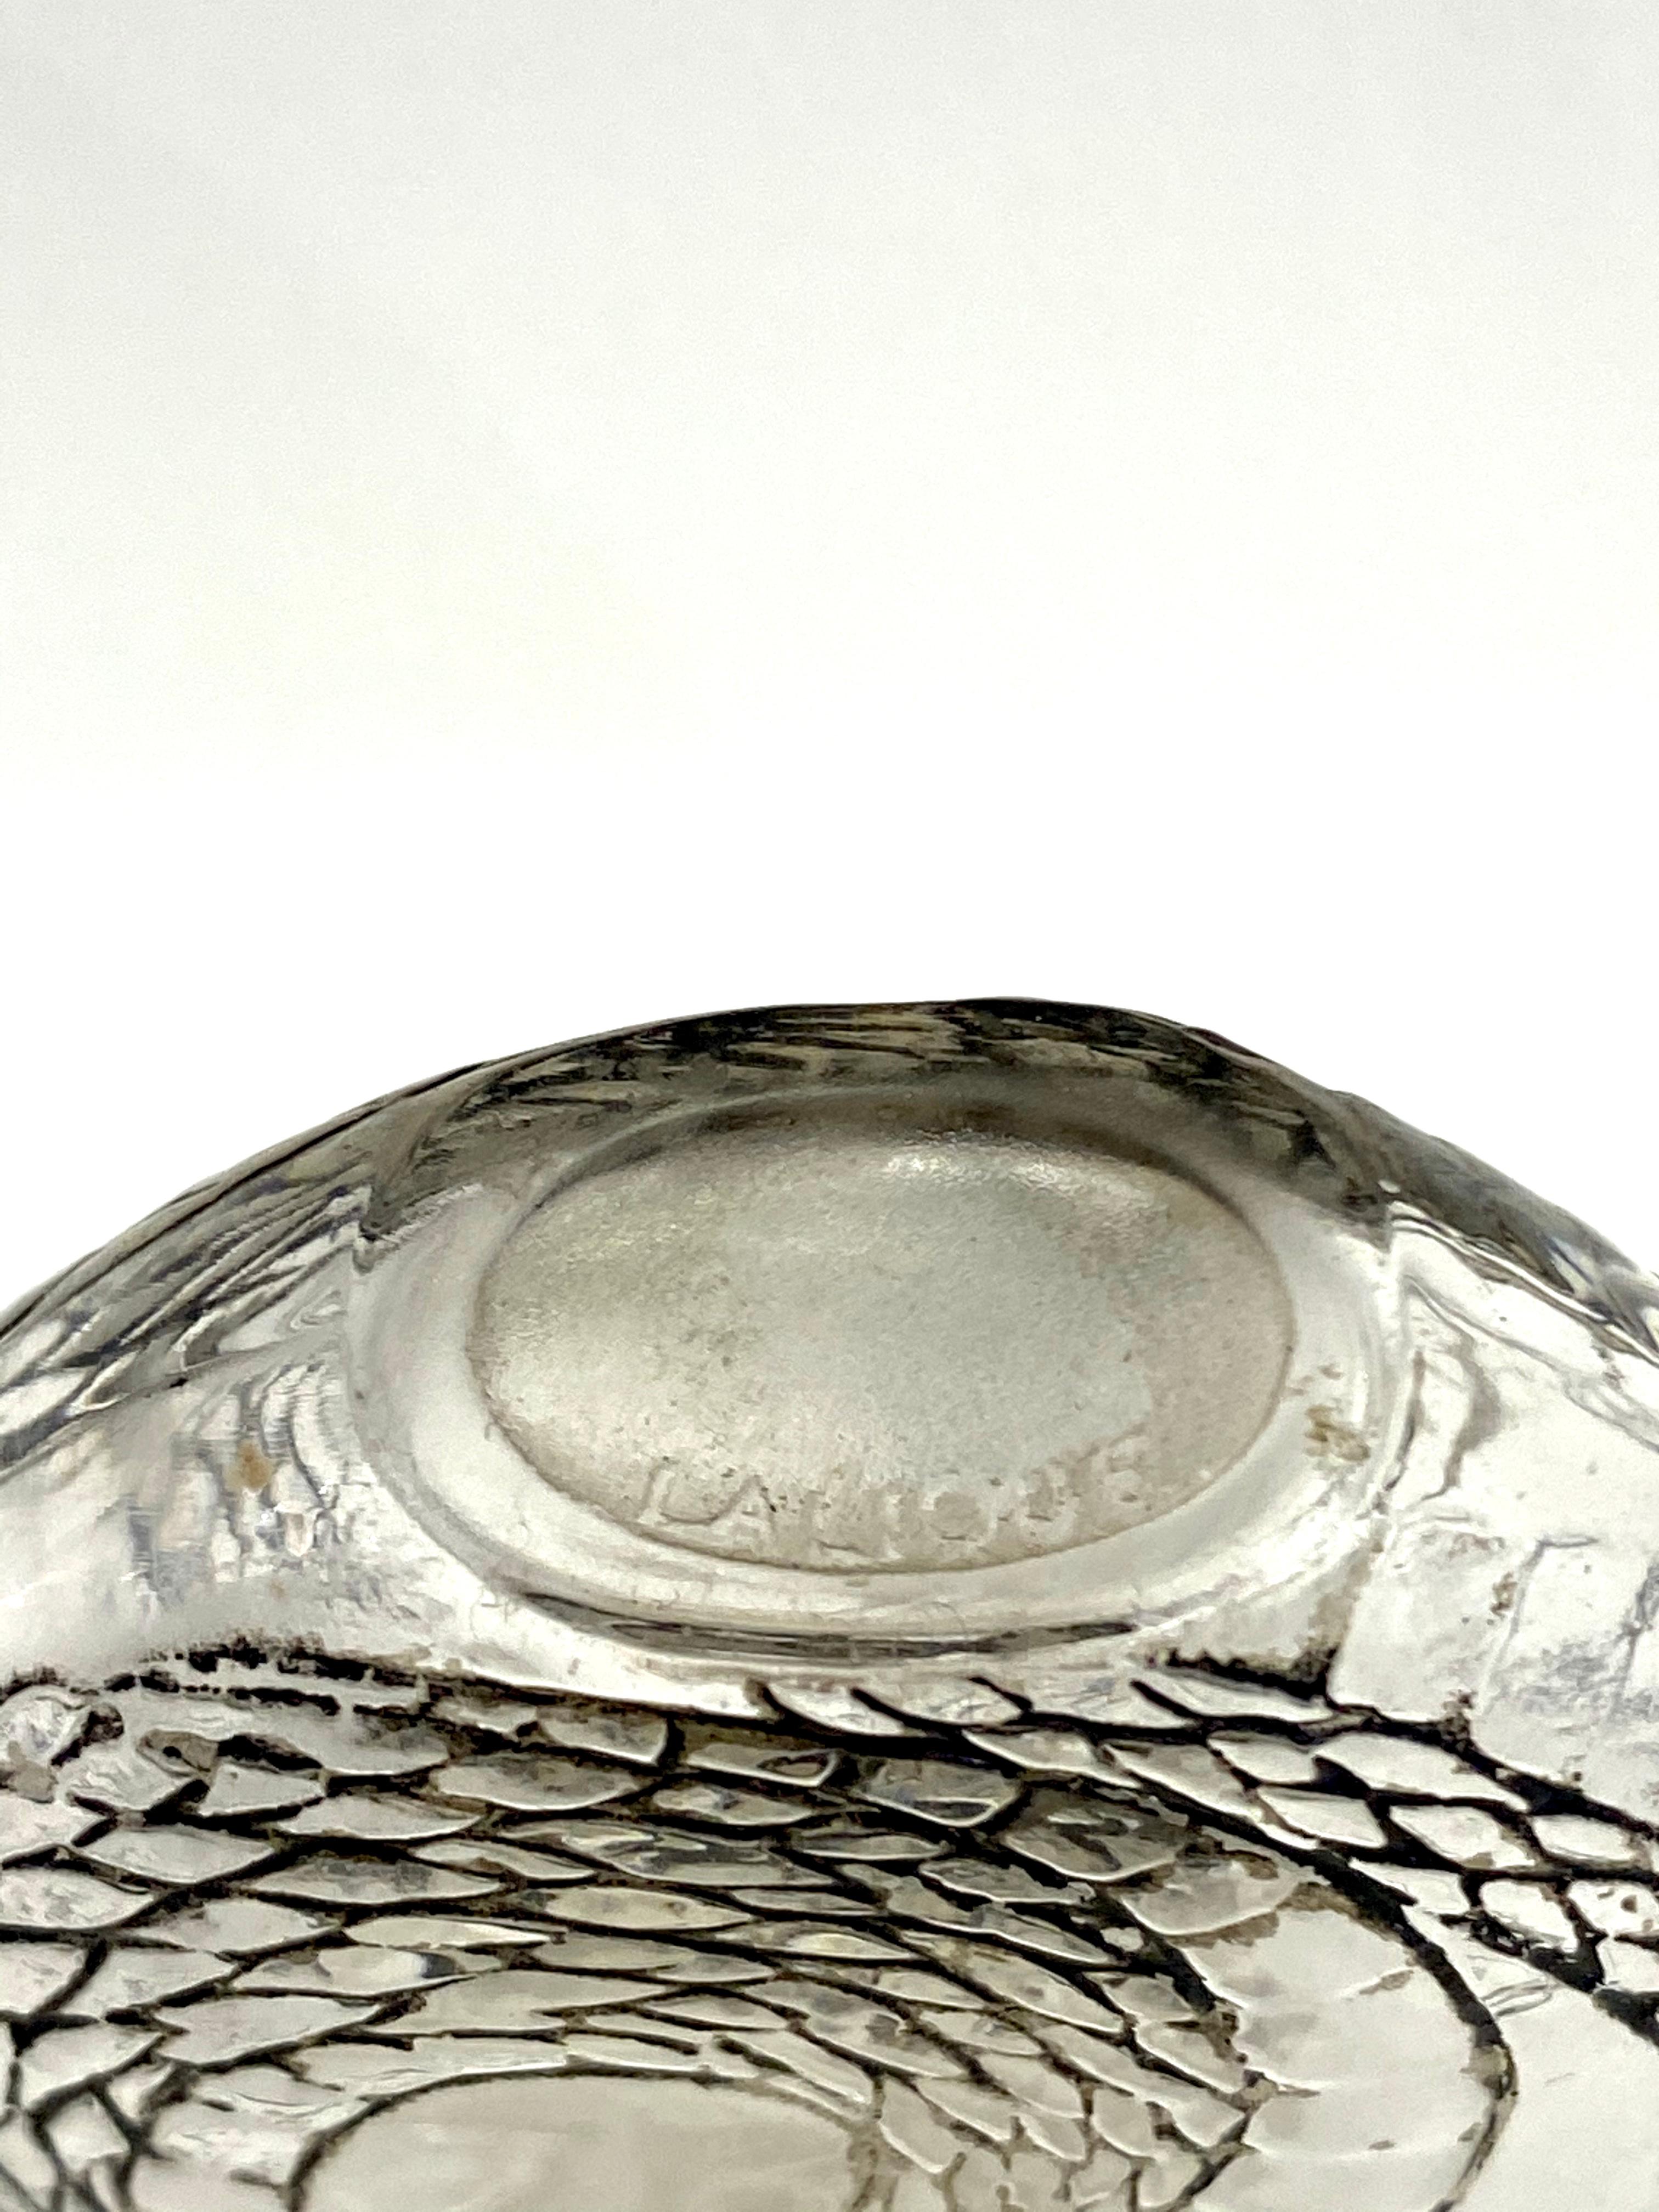 French 1920 Rene Lalique Serpent Perfume Bottle Clear Glass with Black Patina, Snake